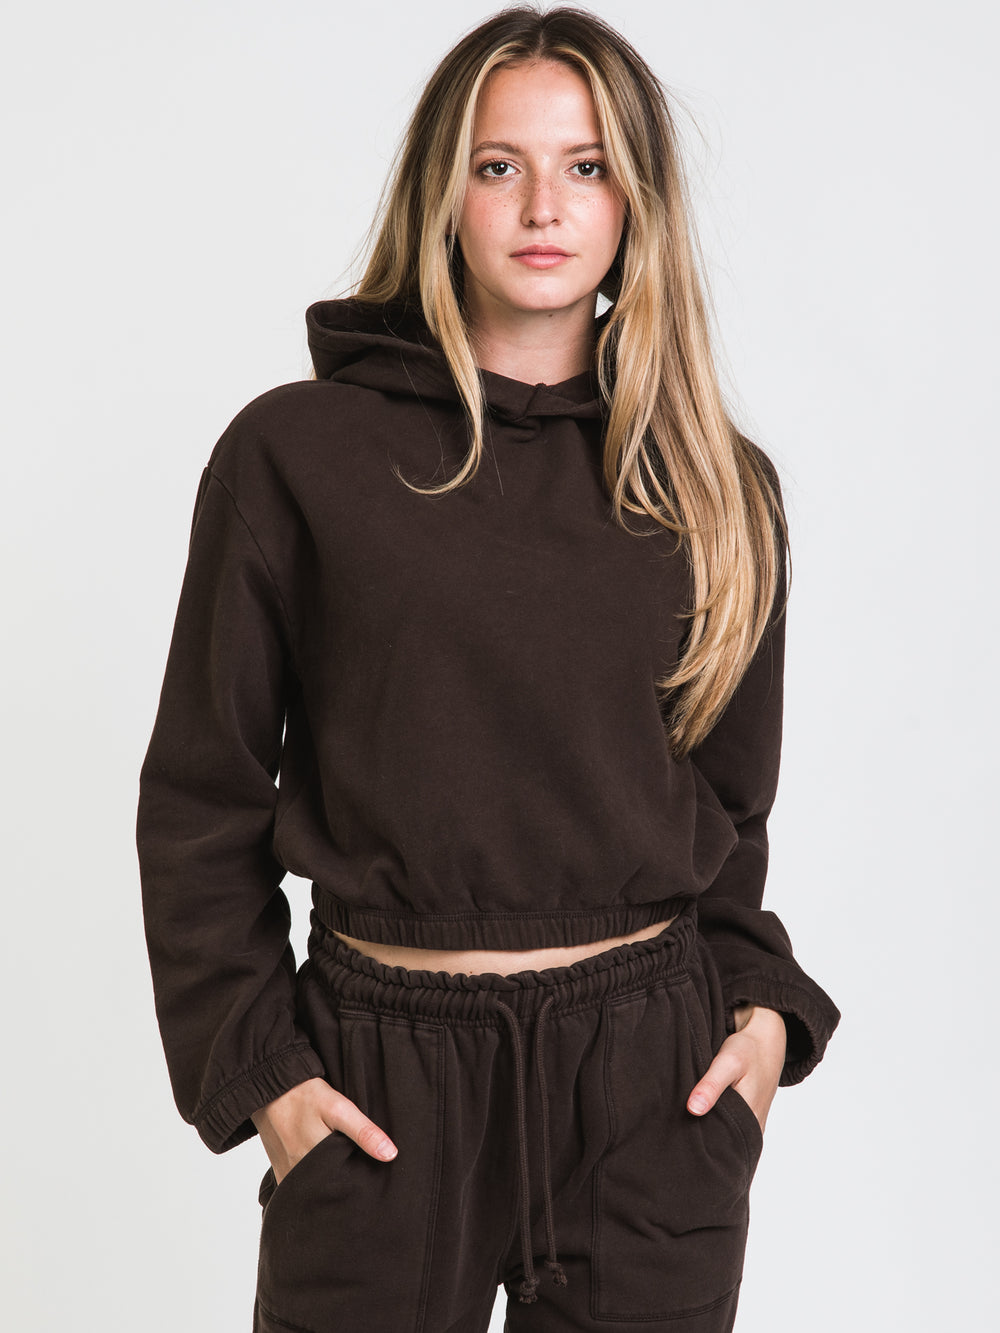 HARLOW HALLE POPOVER HOODIE - CLEARANCE